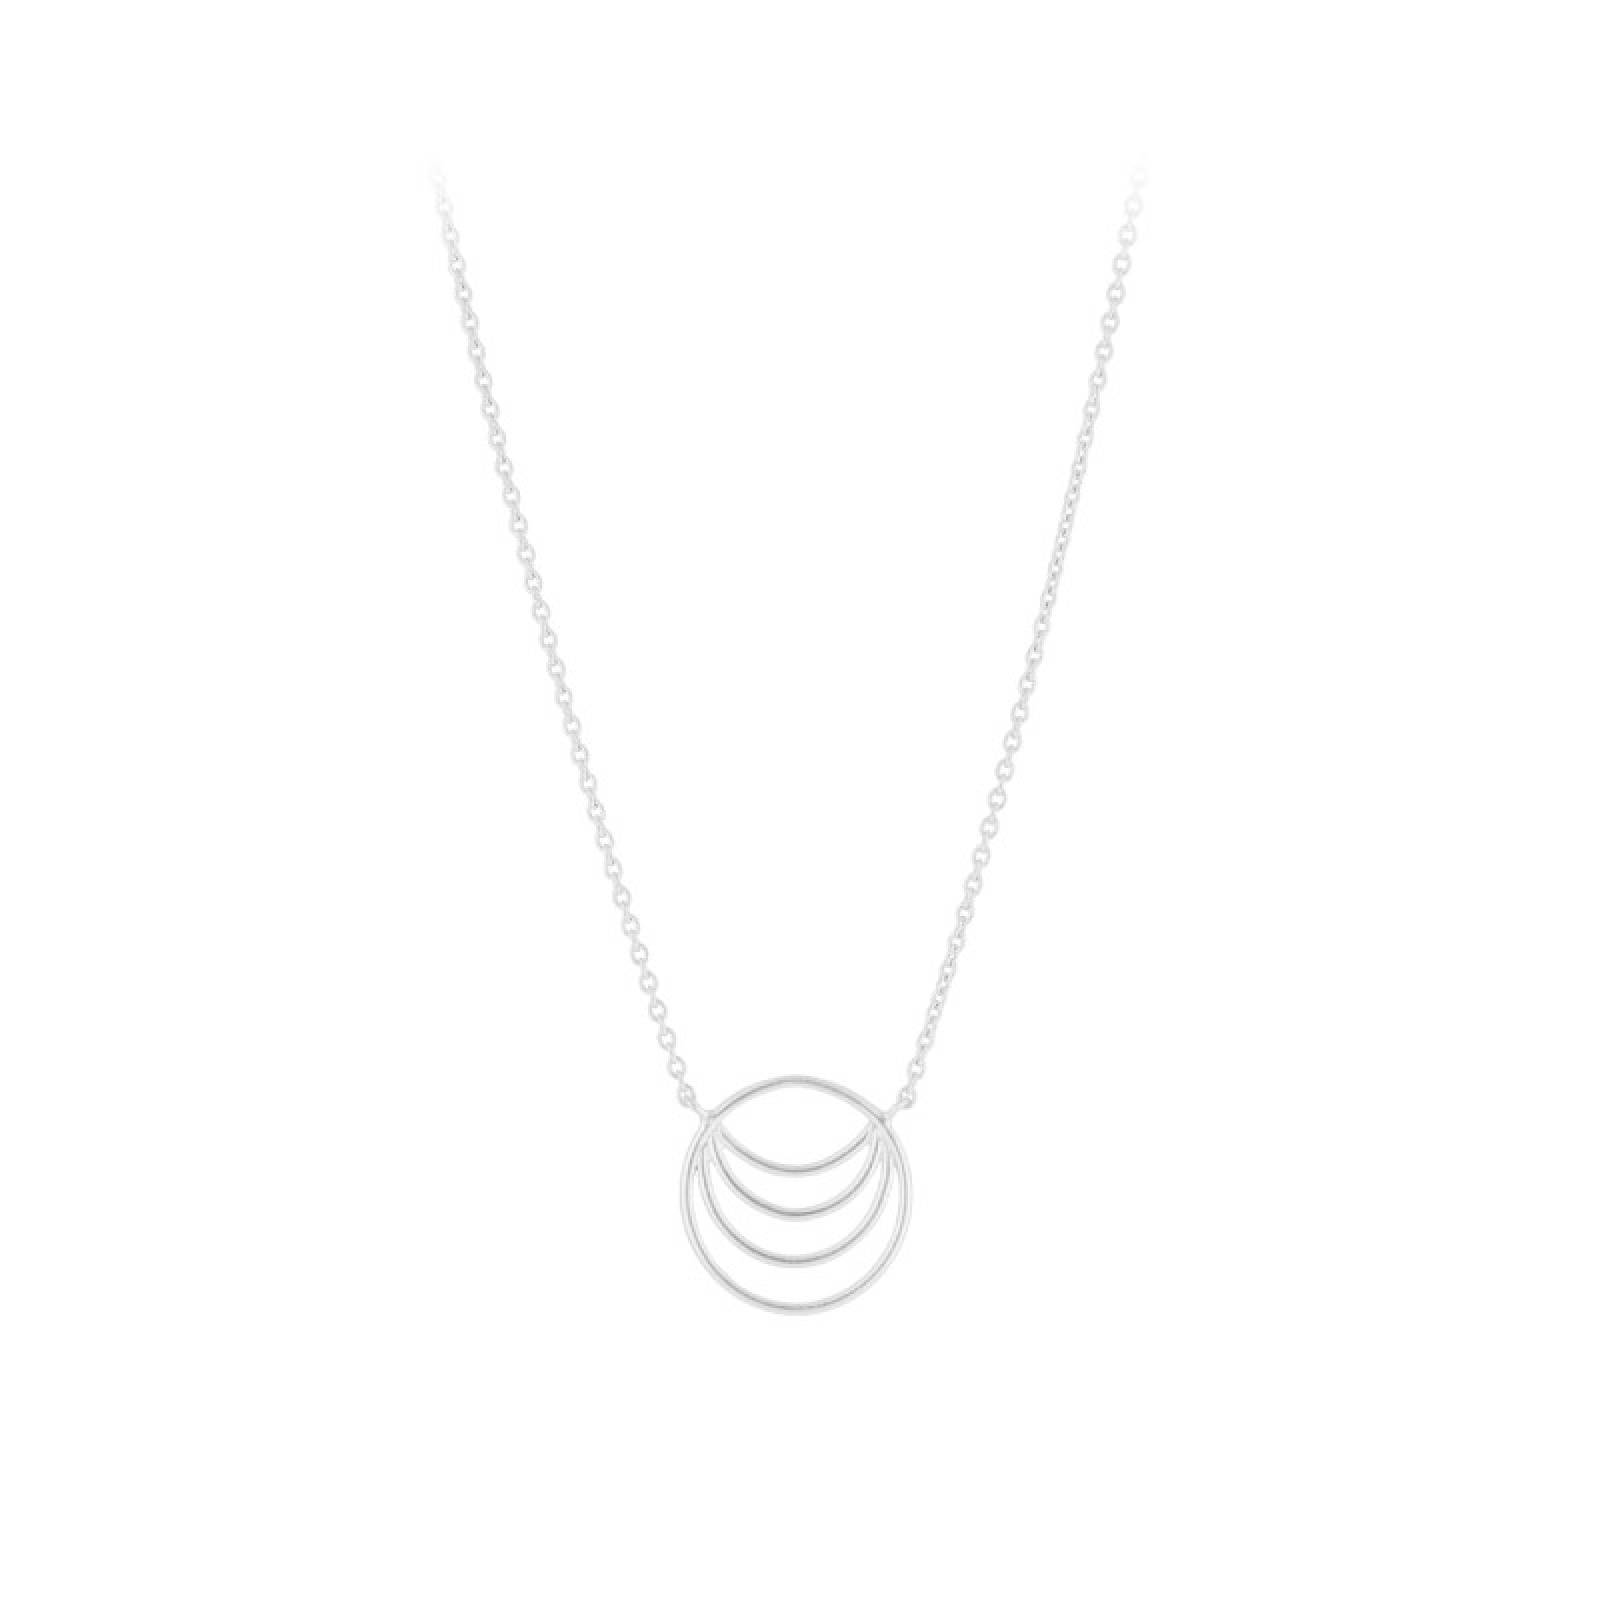 Silhouette Necklace In Silver By Pernille Corydon